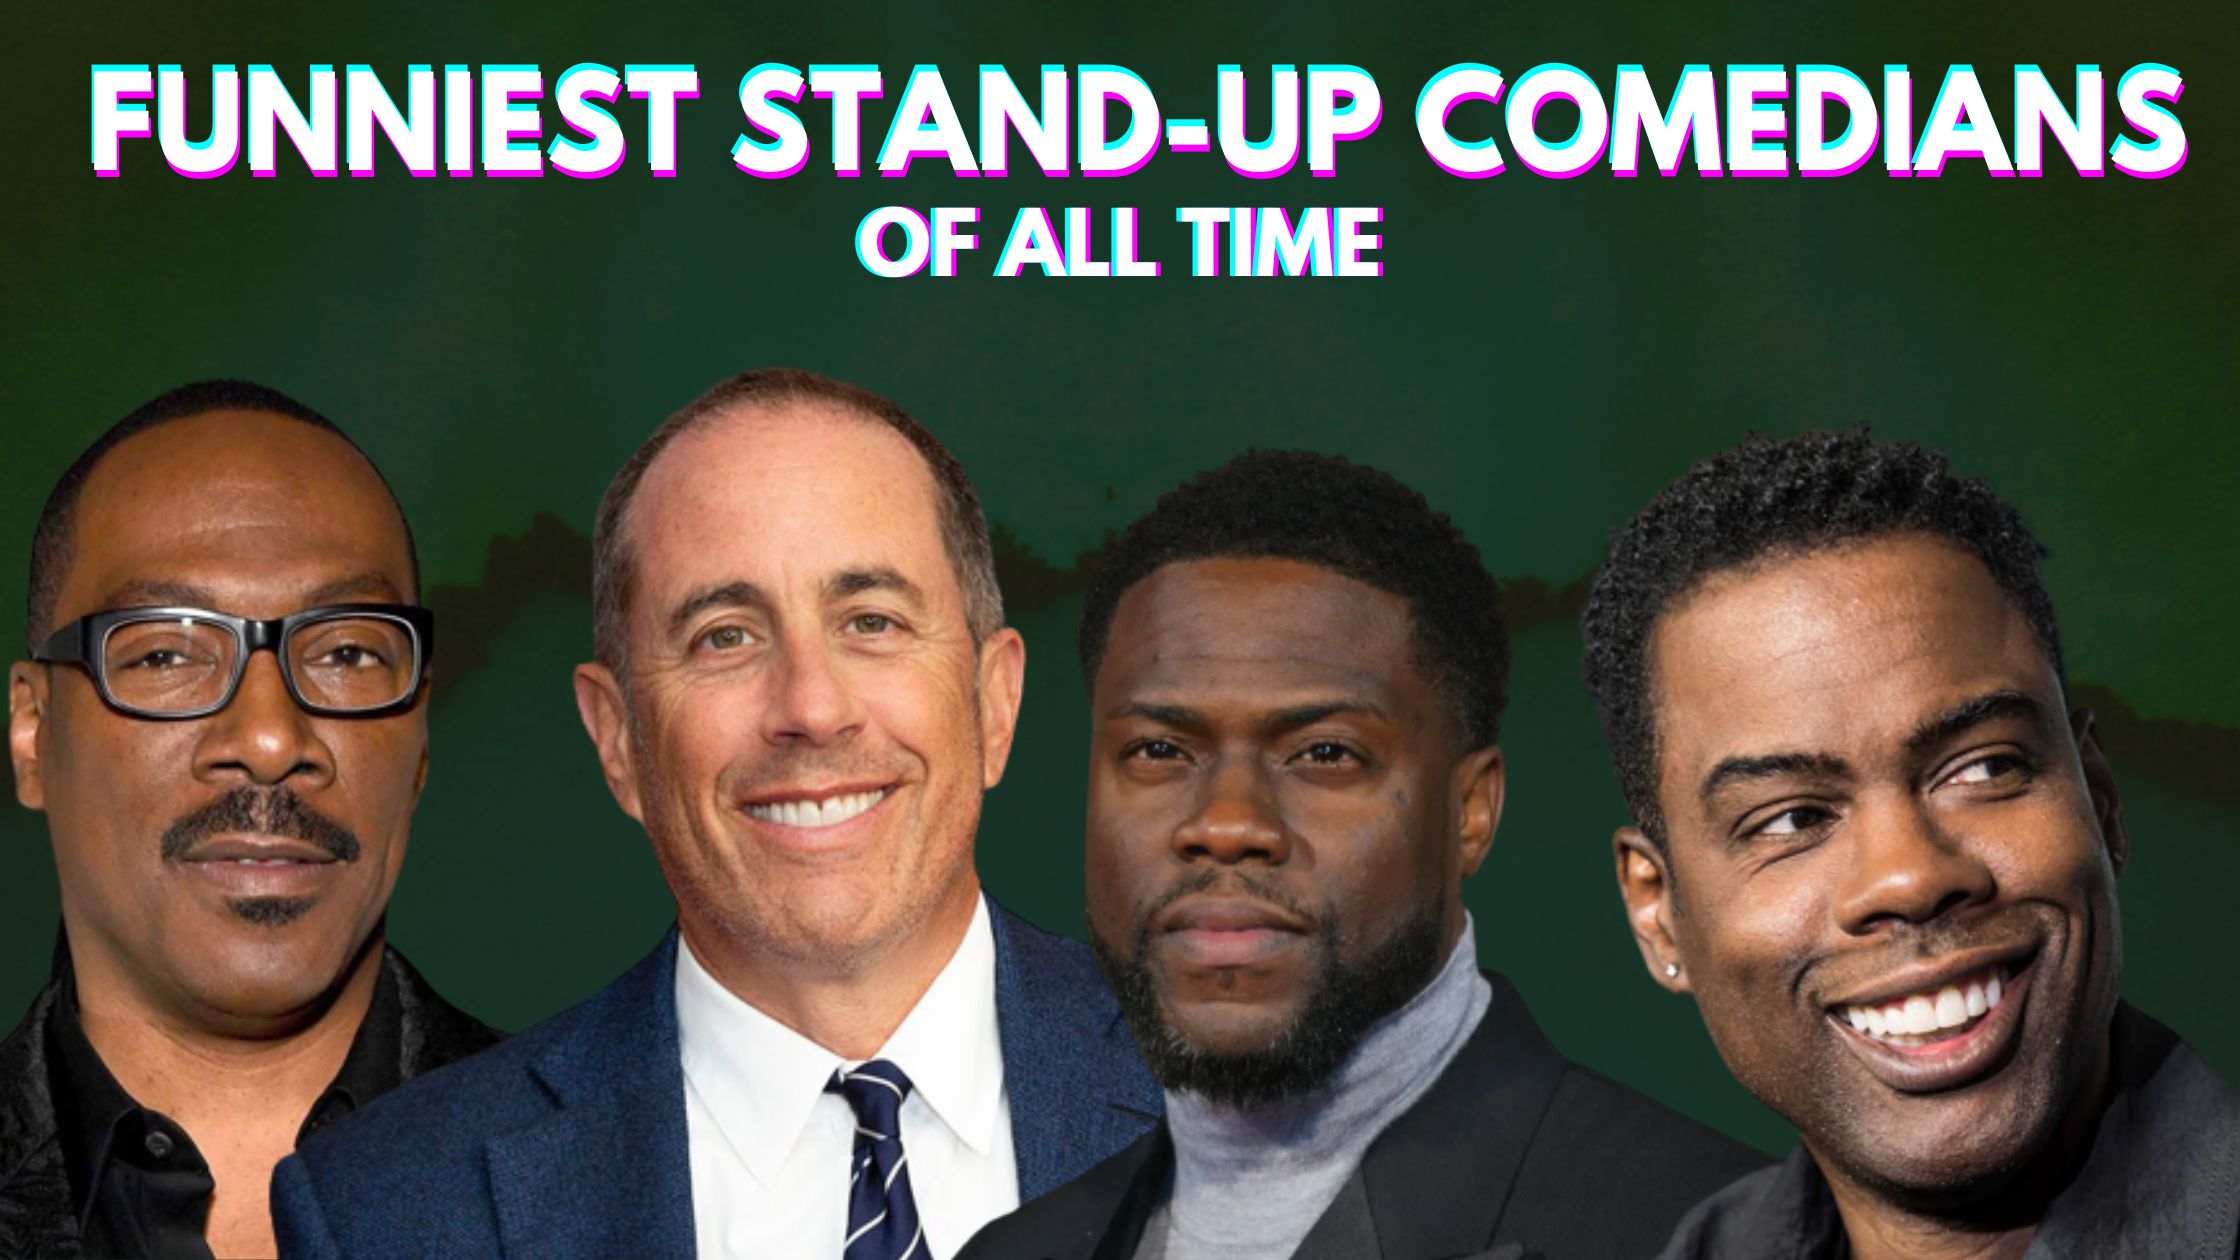 Funniest stand-up comedians